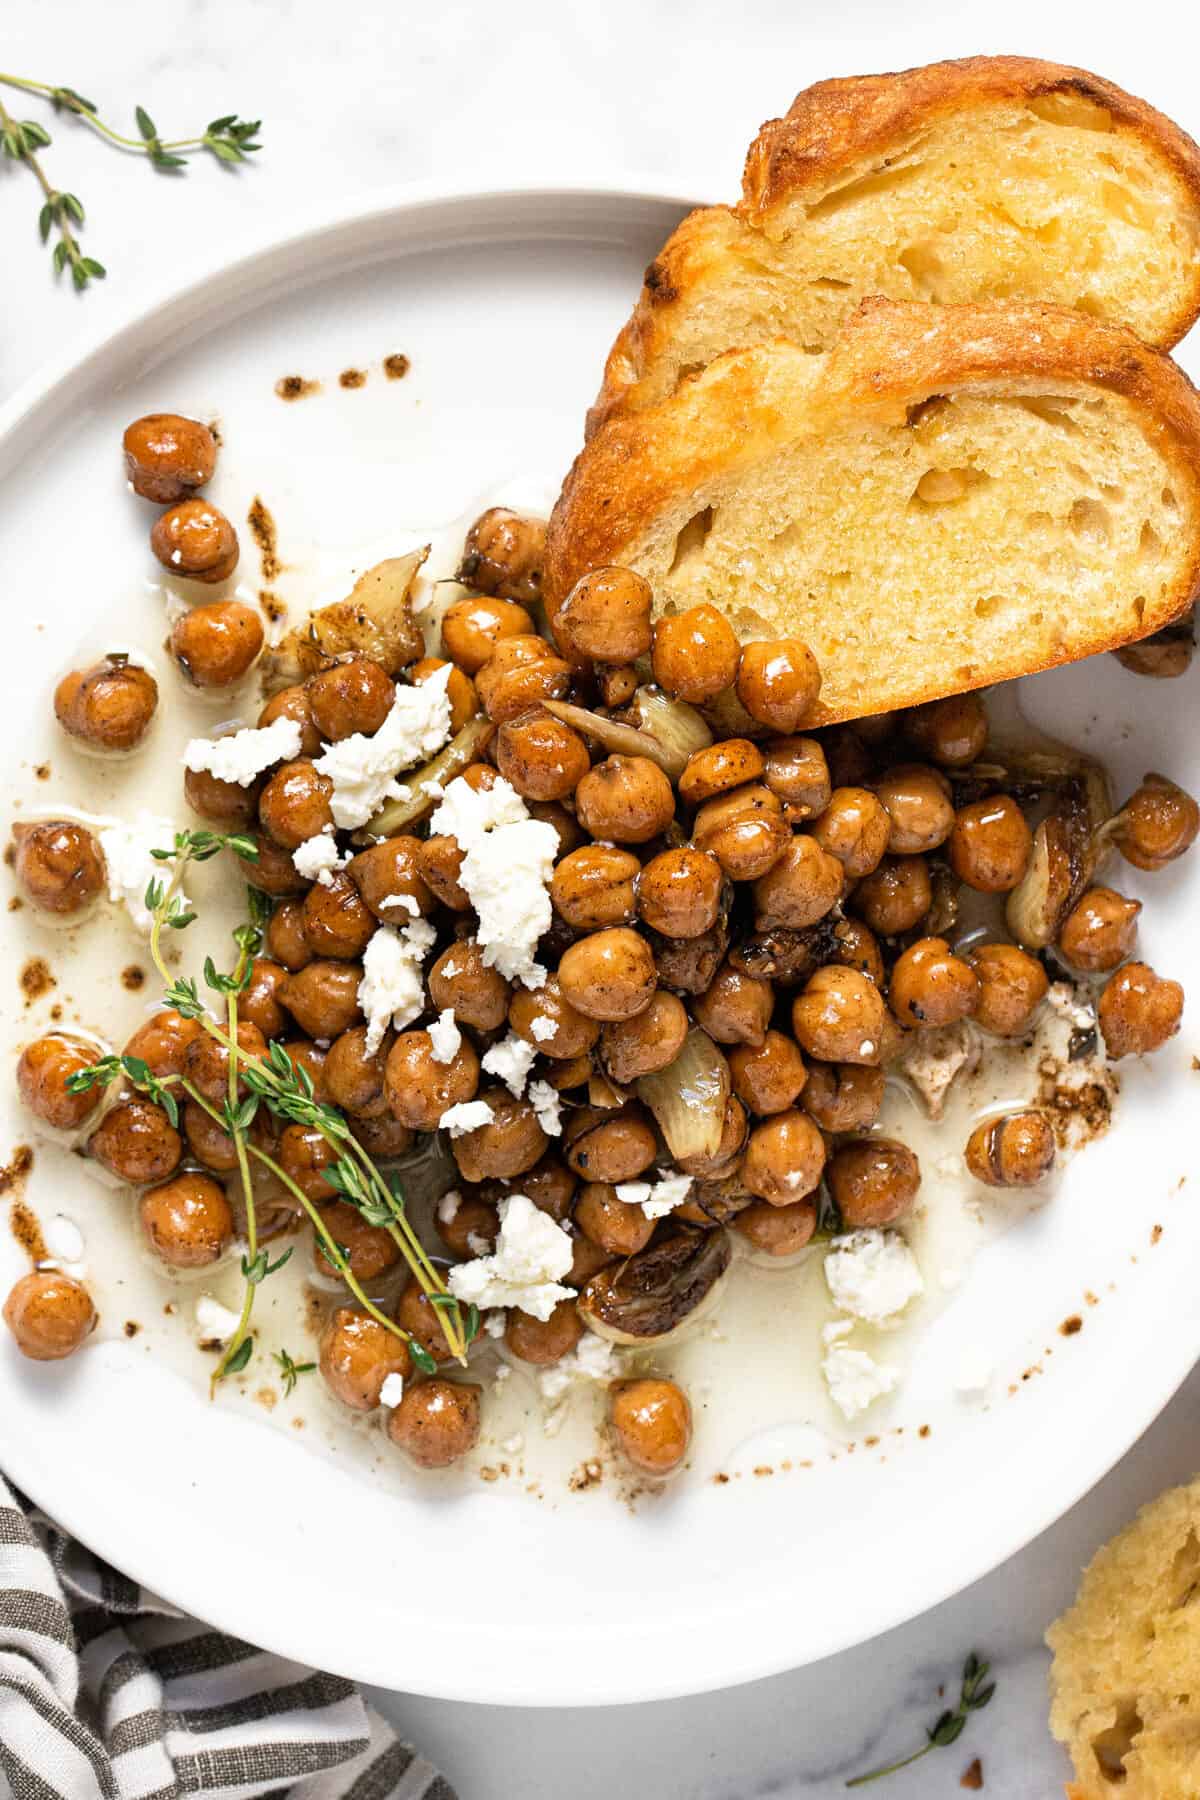 White plate filled with braised chickpeas and a couple slices of crusty bread